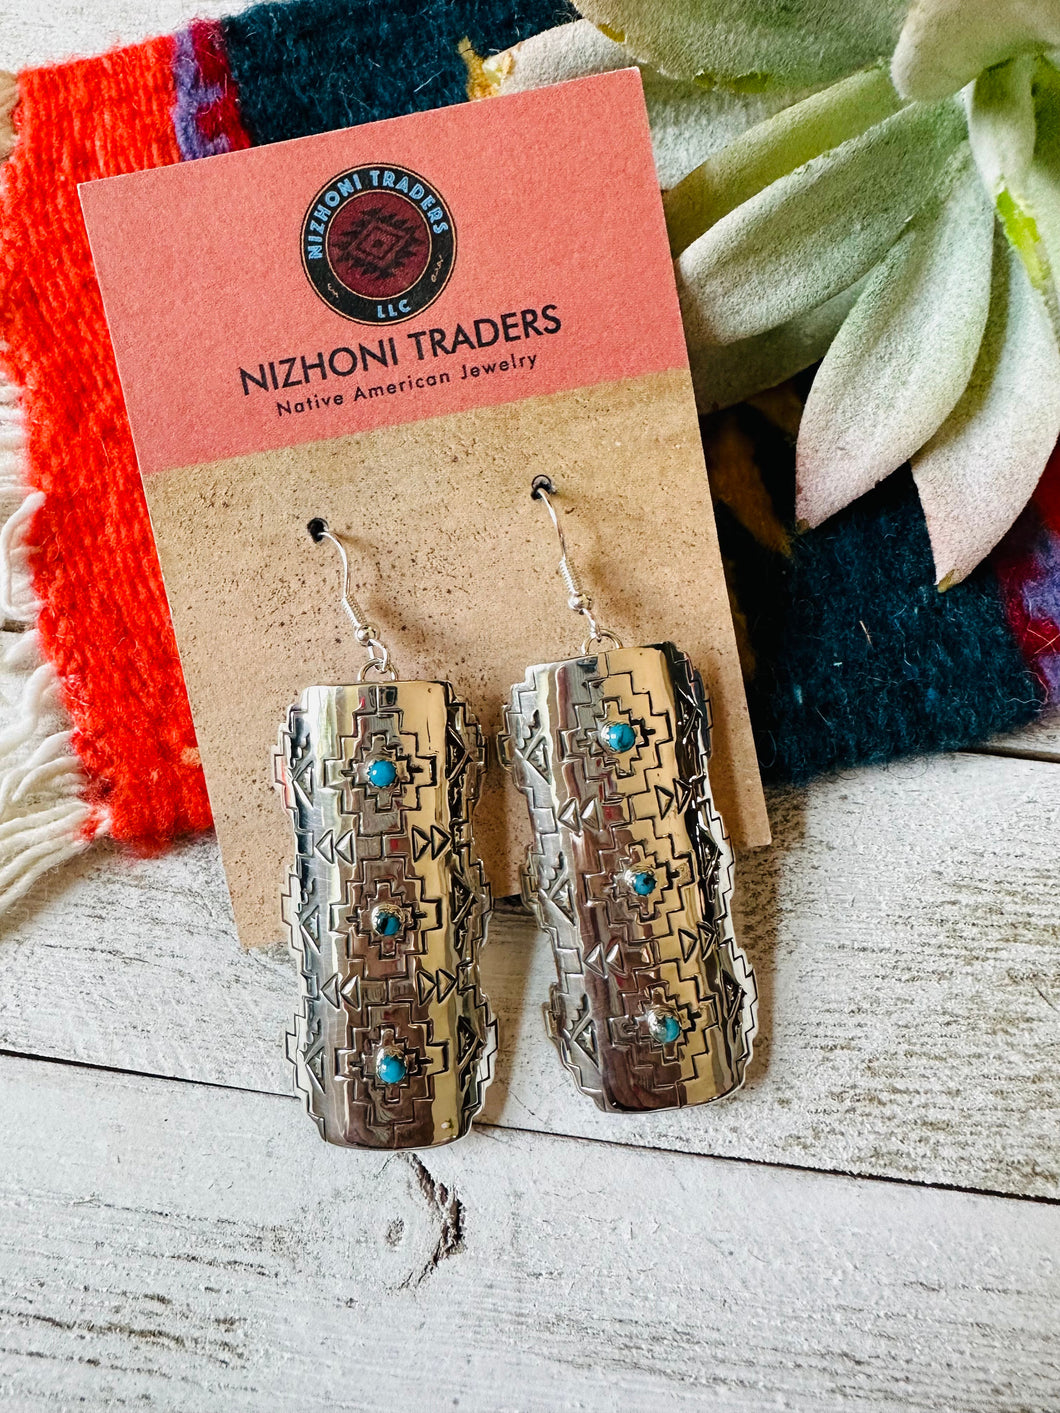 Navajo Hand Stamped Sterling Silver & Turquoise Dangle Earrings